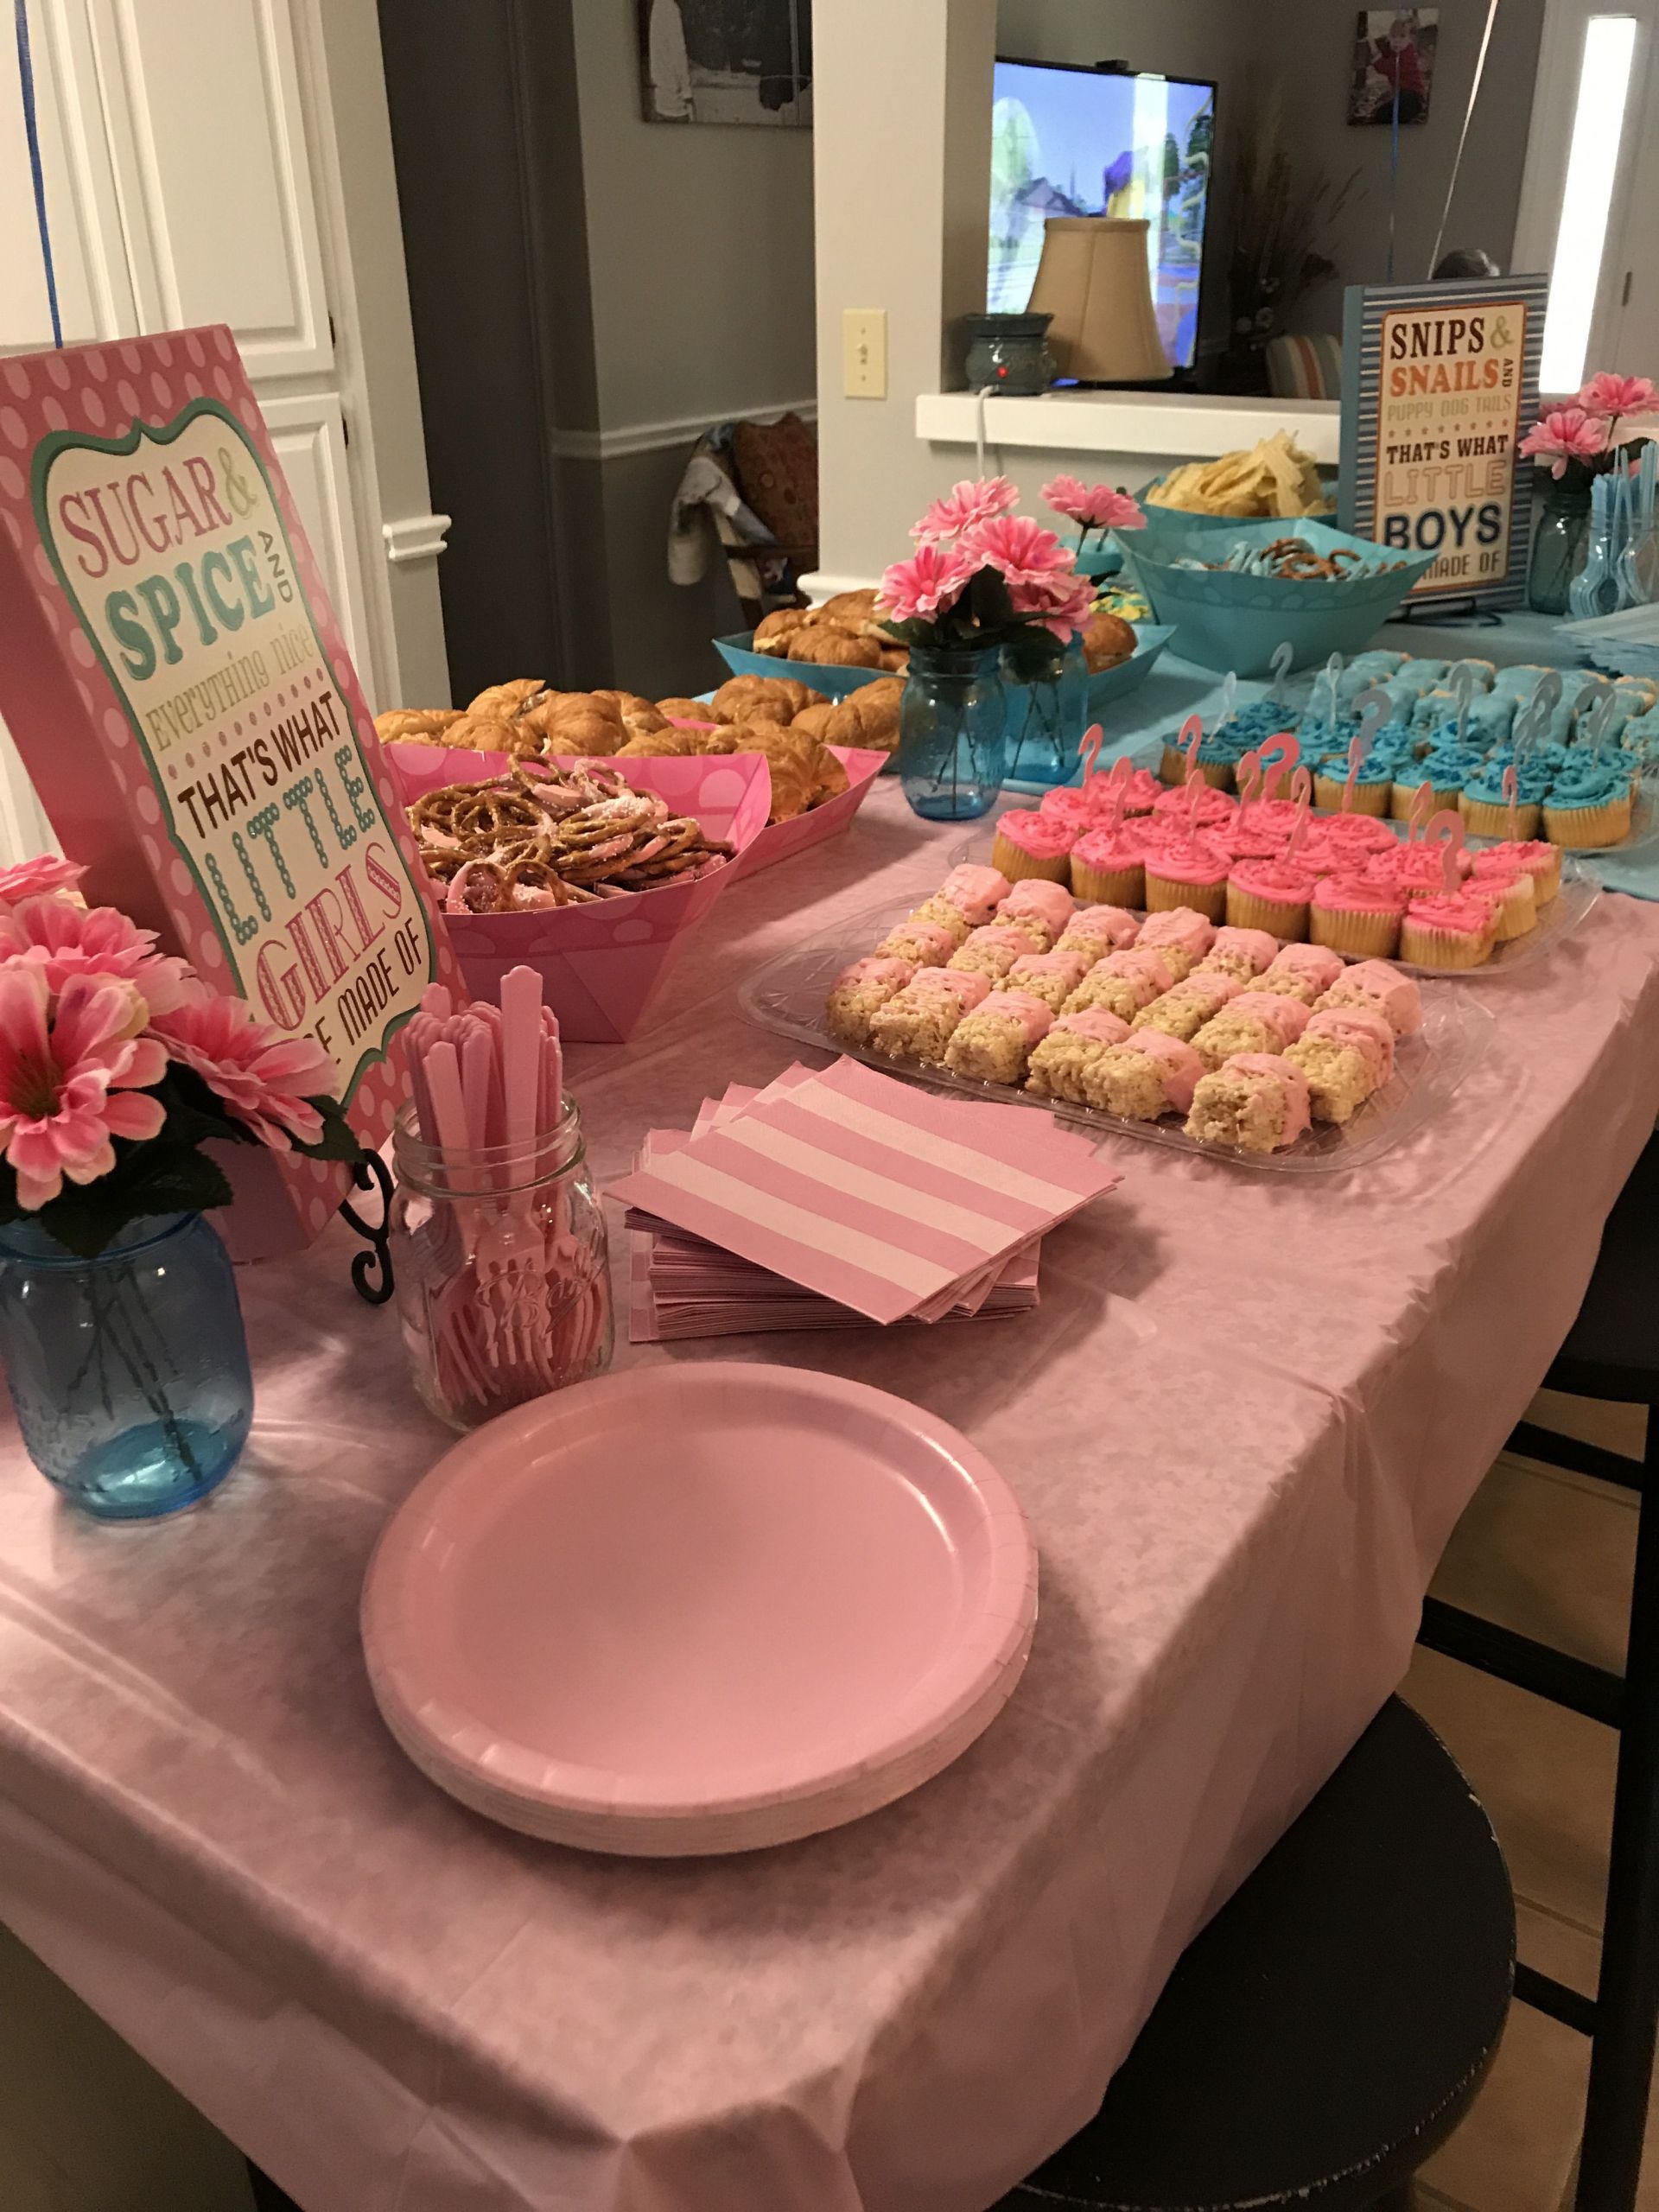 Food Ideas For Baby Gender Reveal Party
 10 Gender Reveal Party Food Ideas that are Mouth Watering